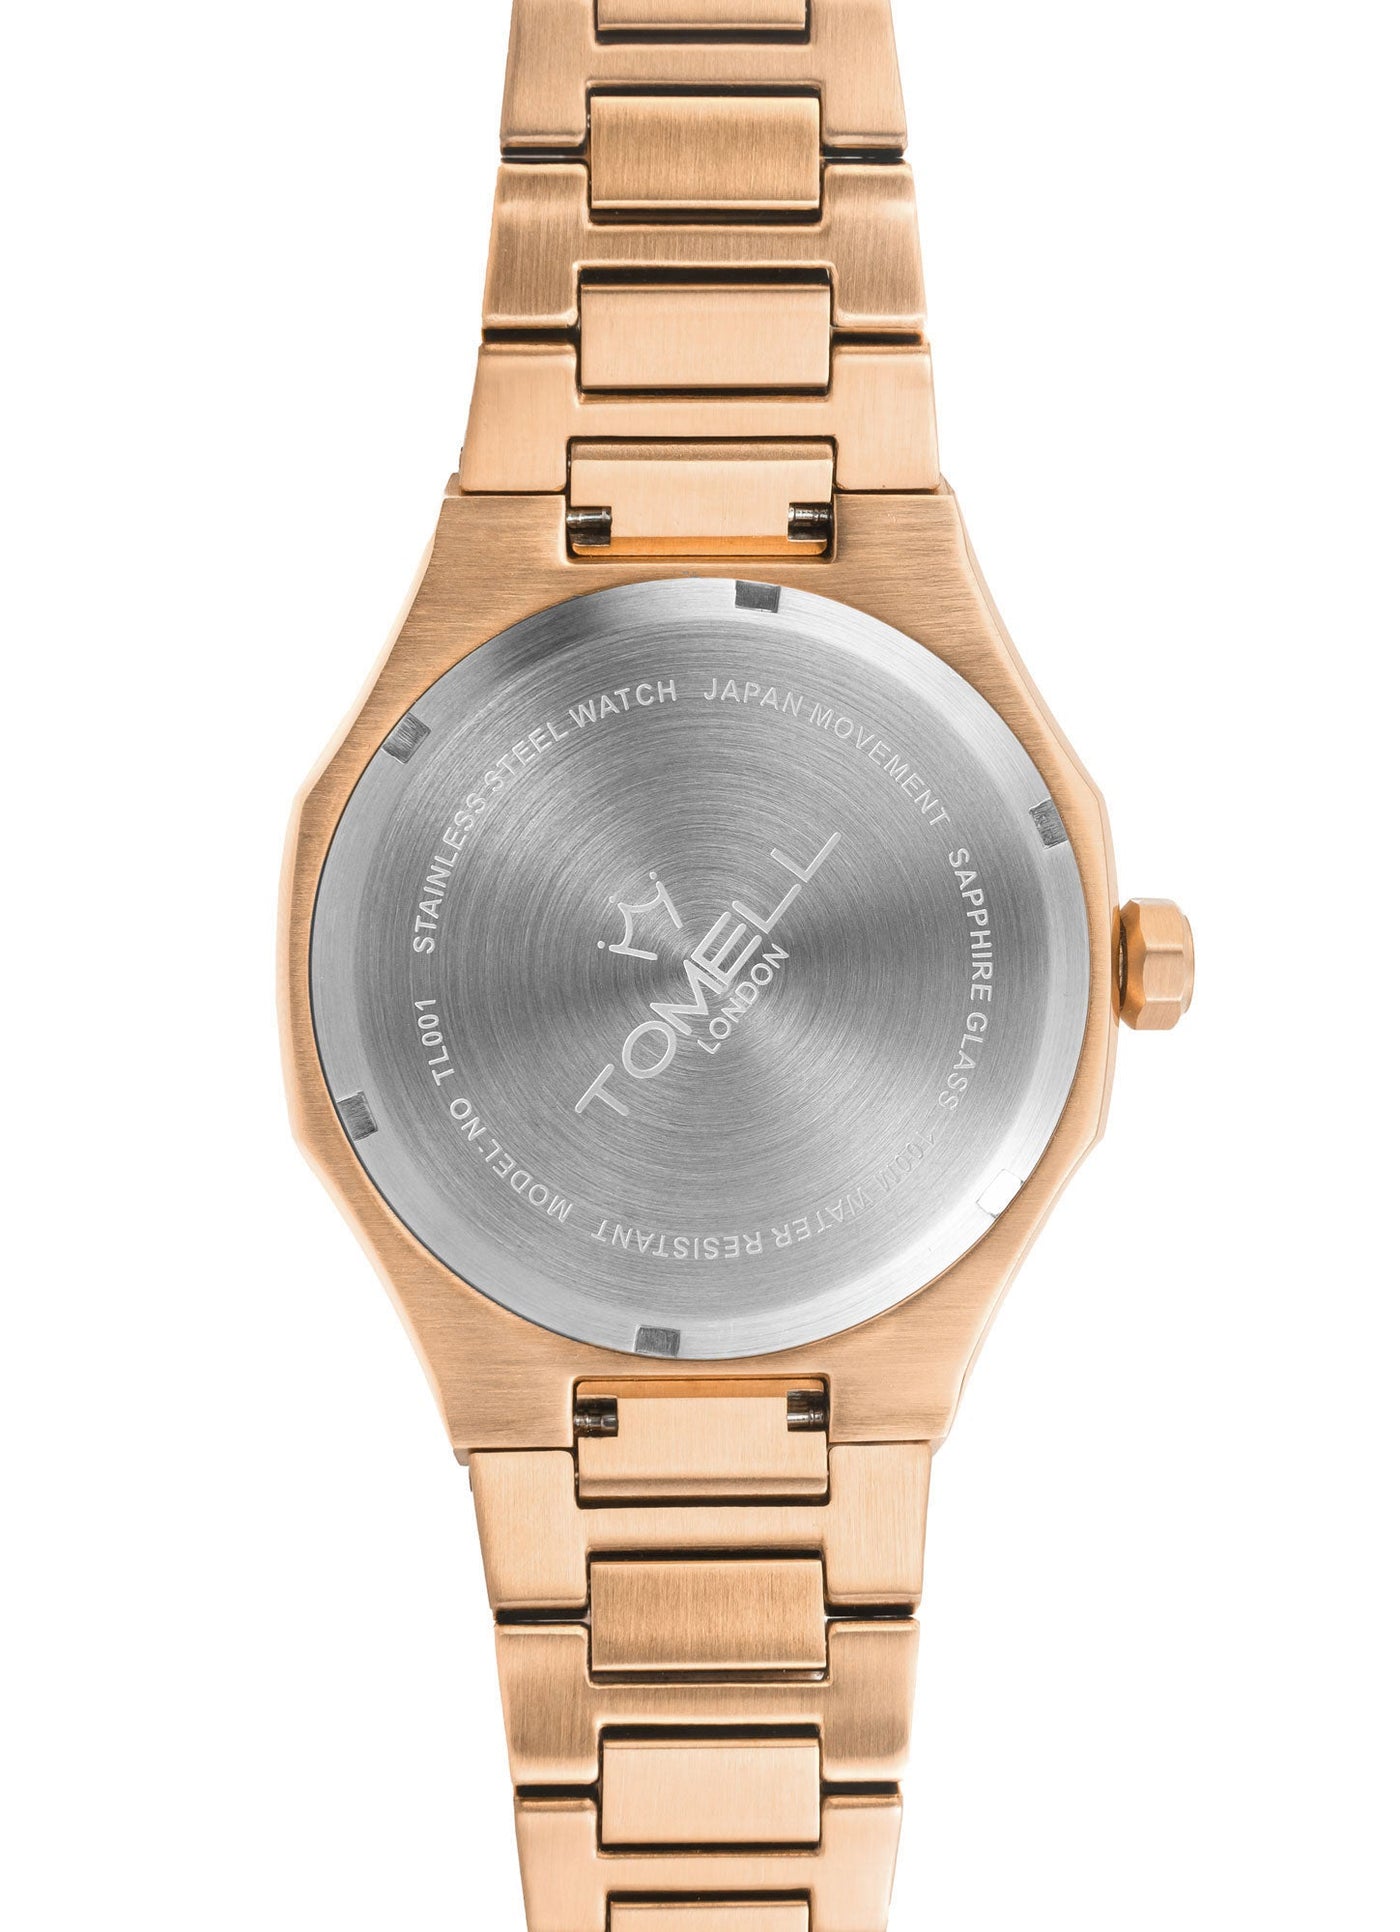 RAINBOW EDITION ROSE GOLD - Tomell London